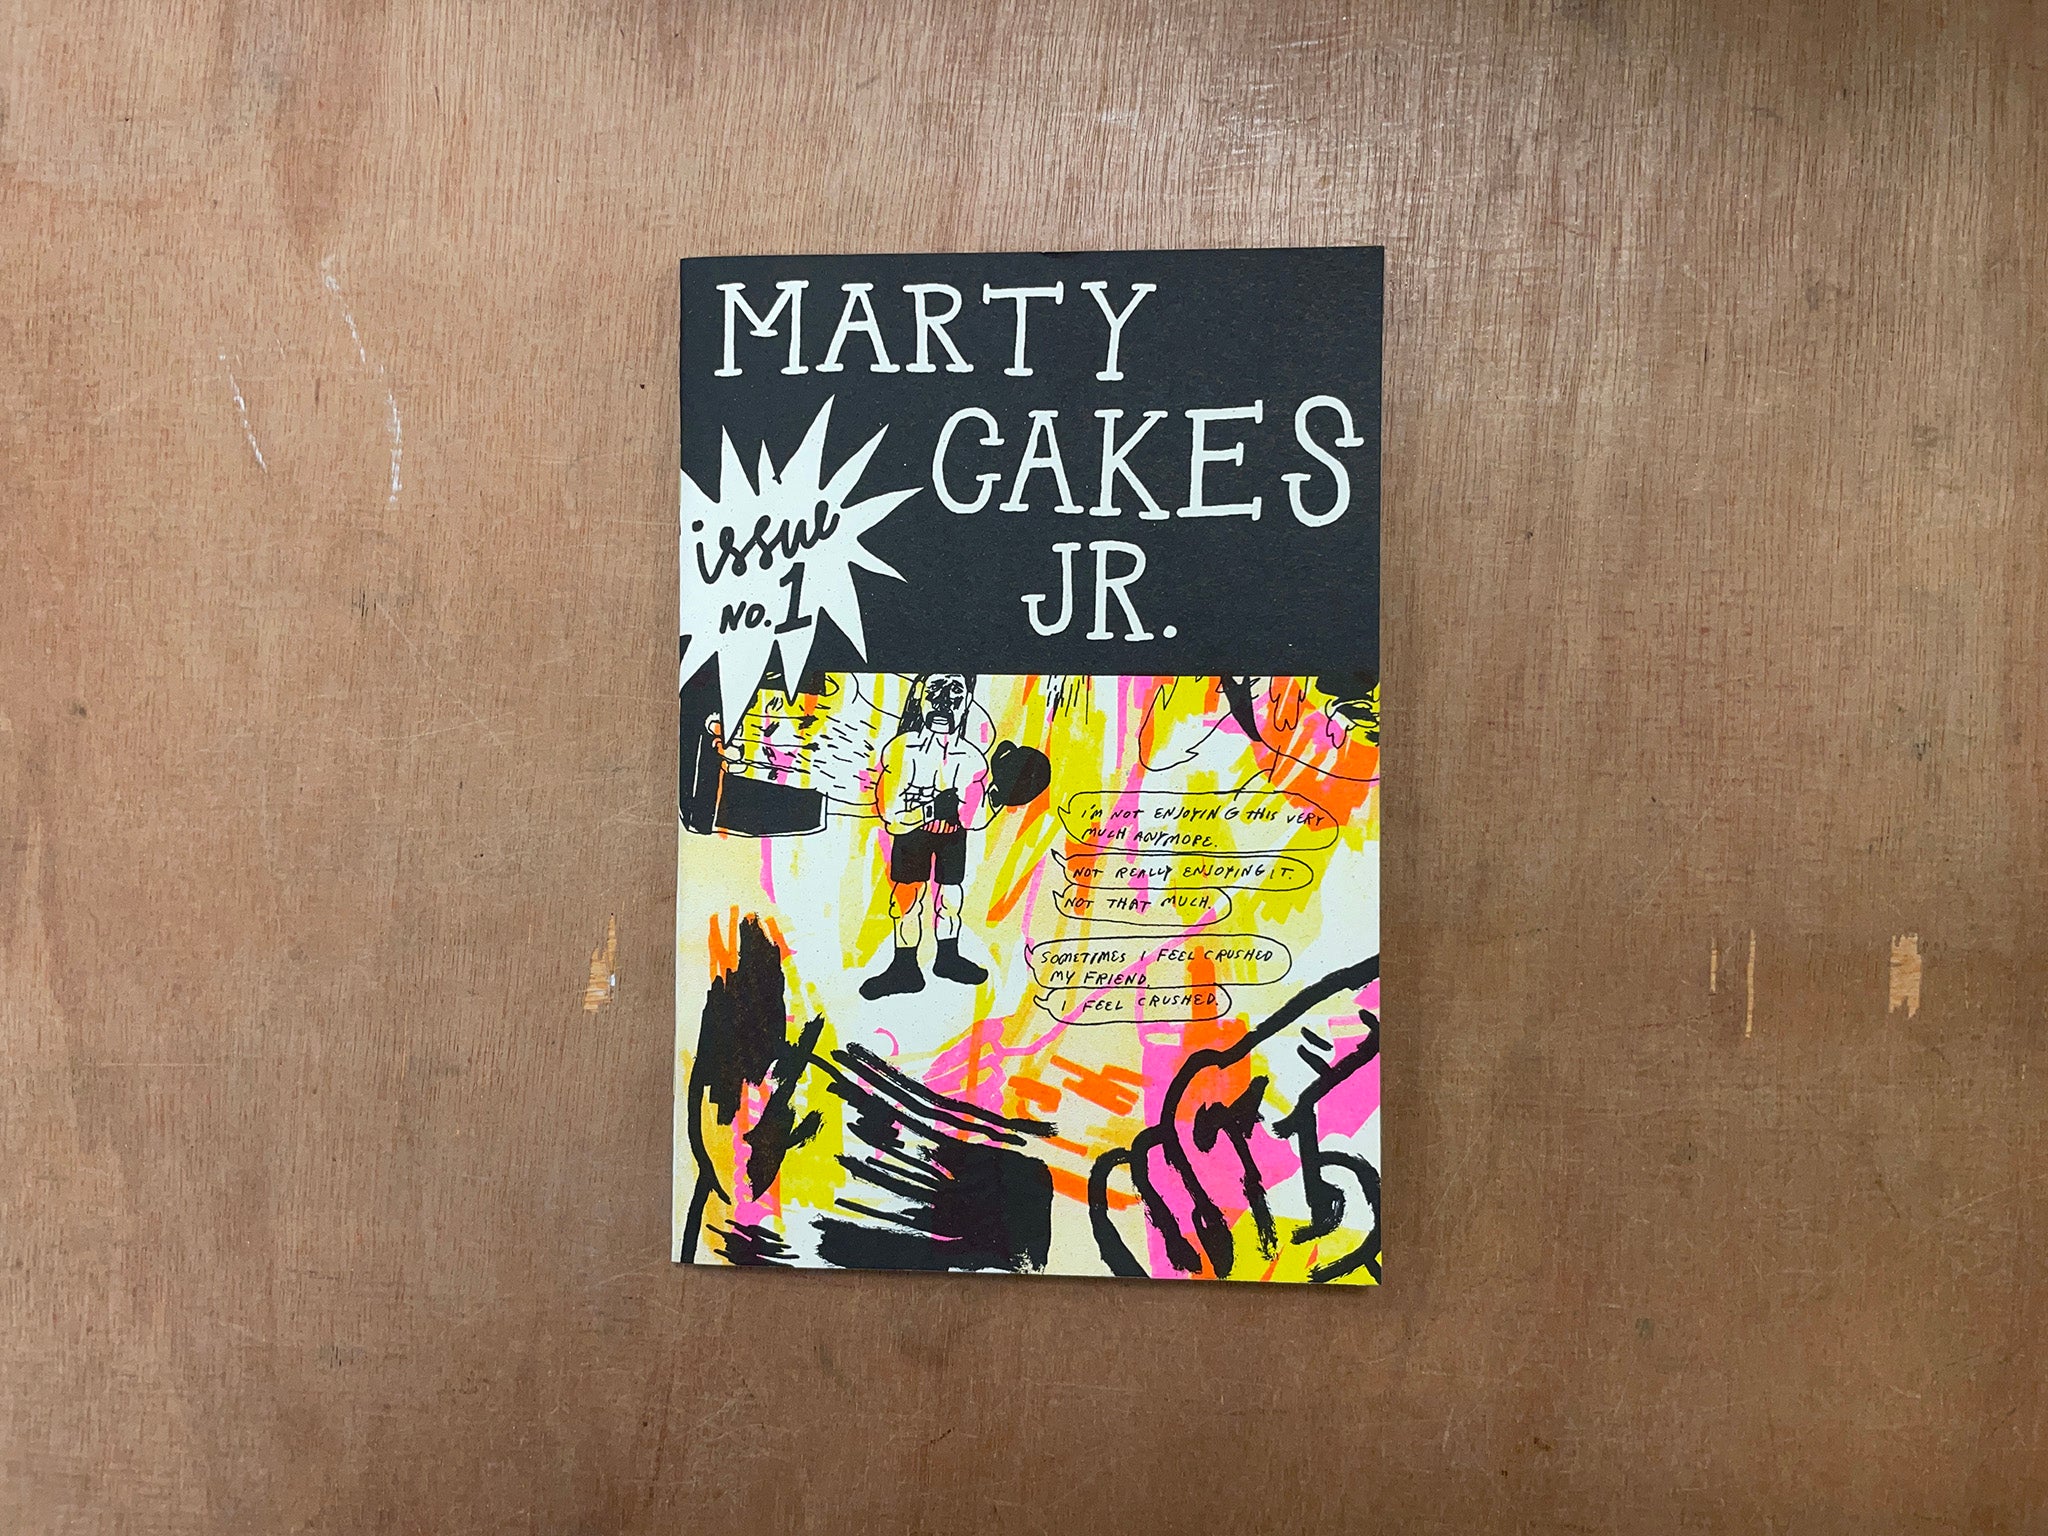 MARTY CAKES JR: ISSUE 1 by Folded City